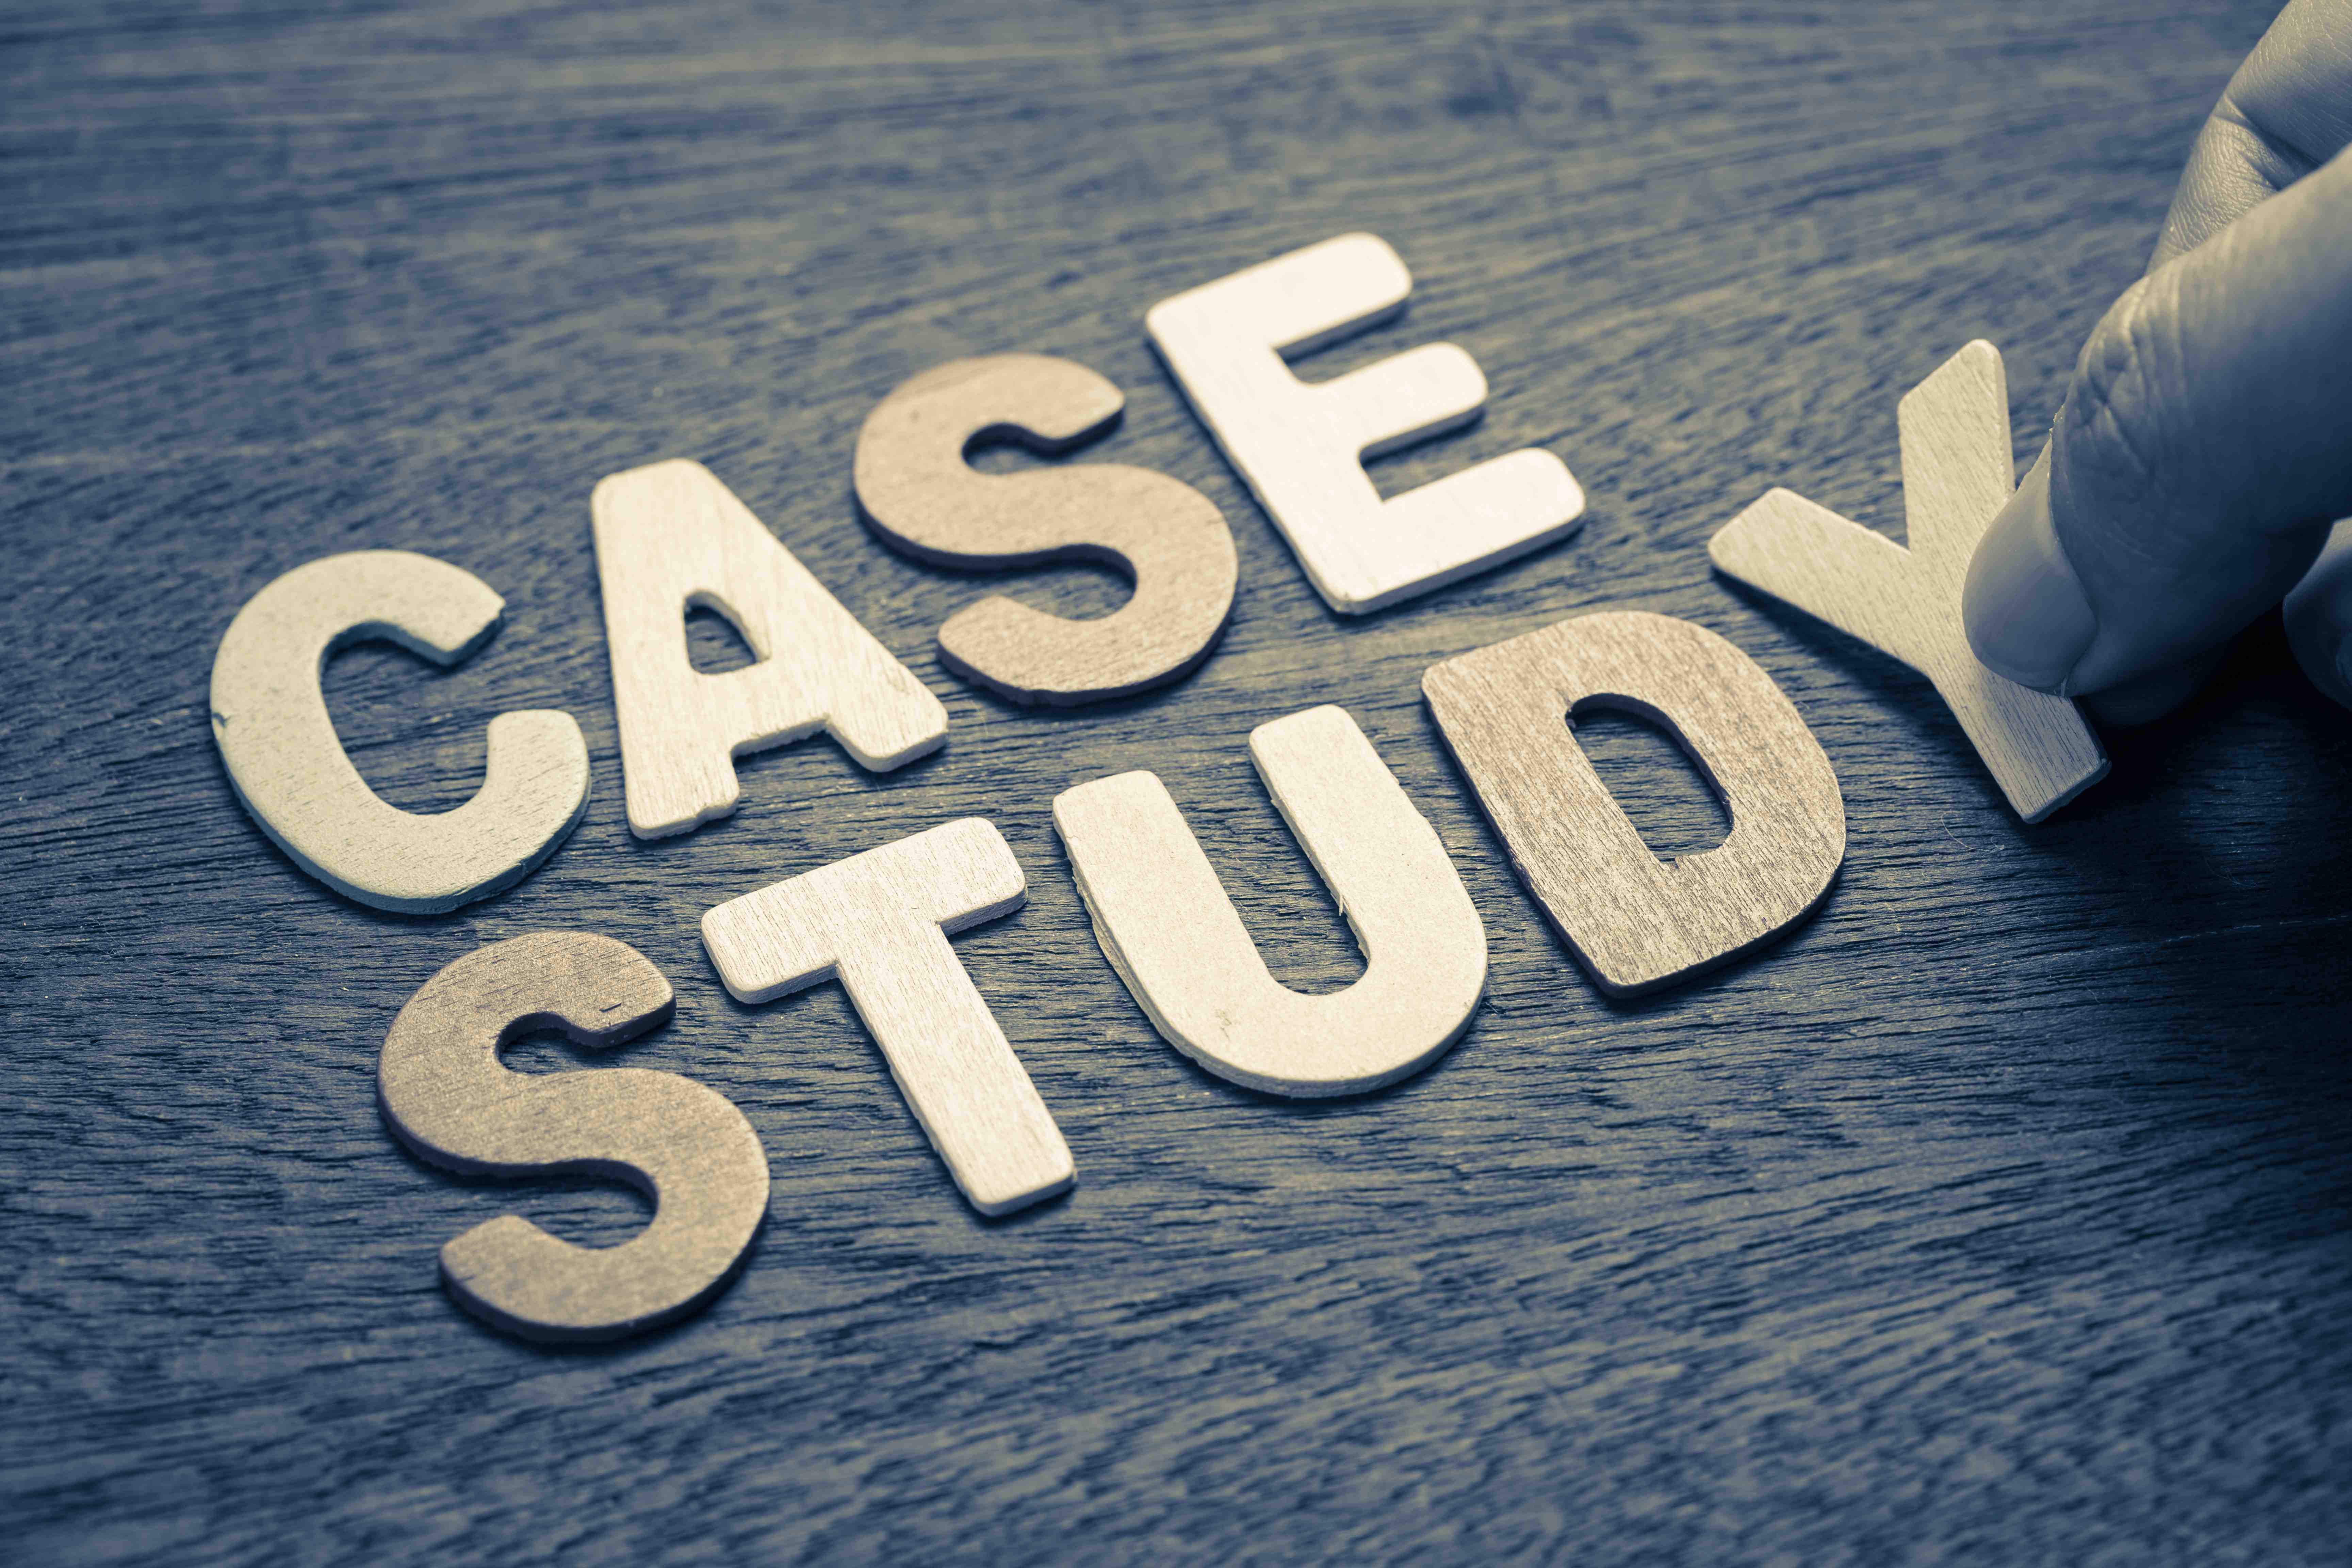 Writing Case Studies to Boost SEO